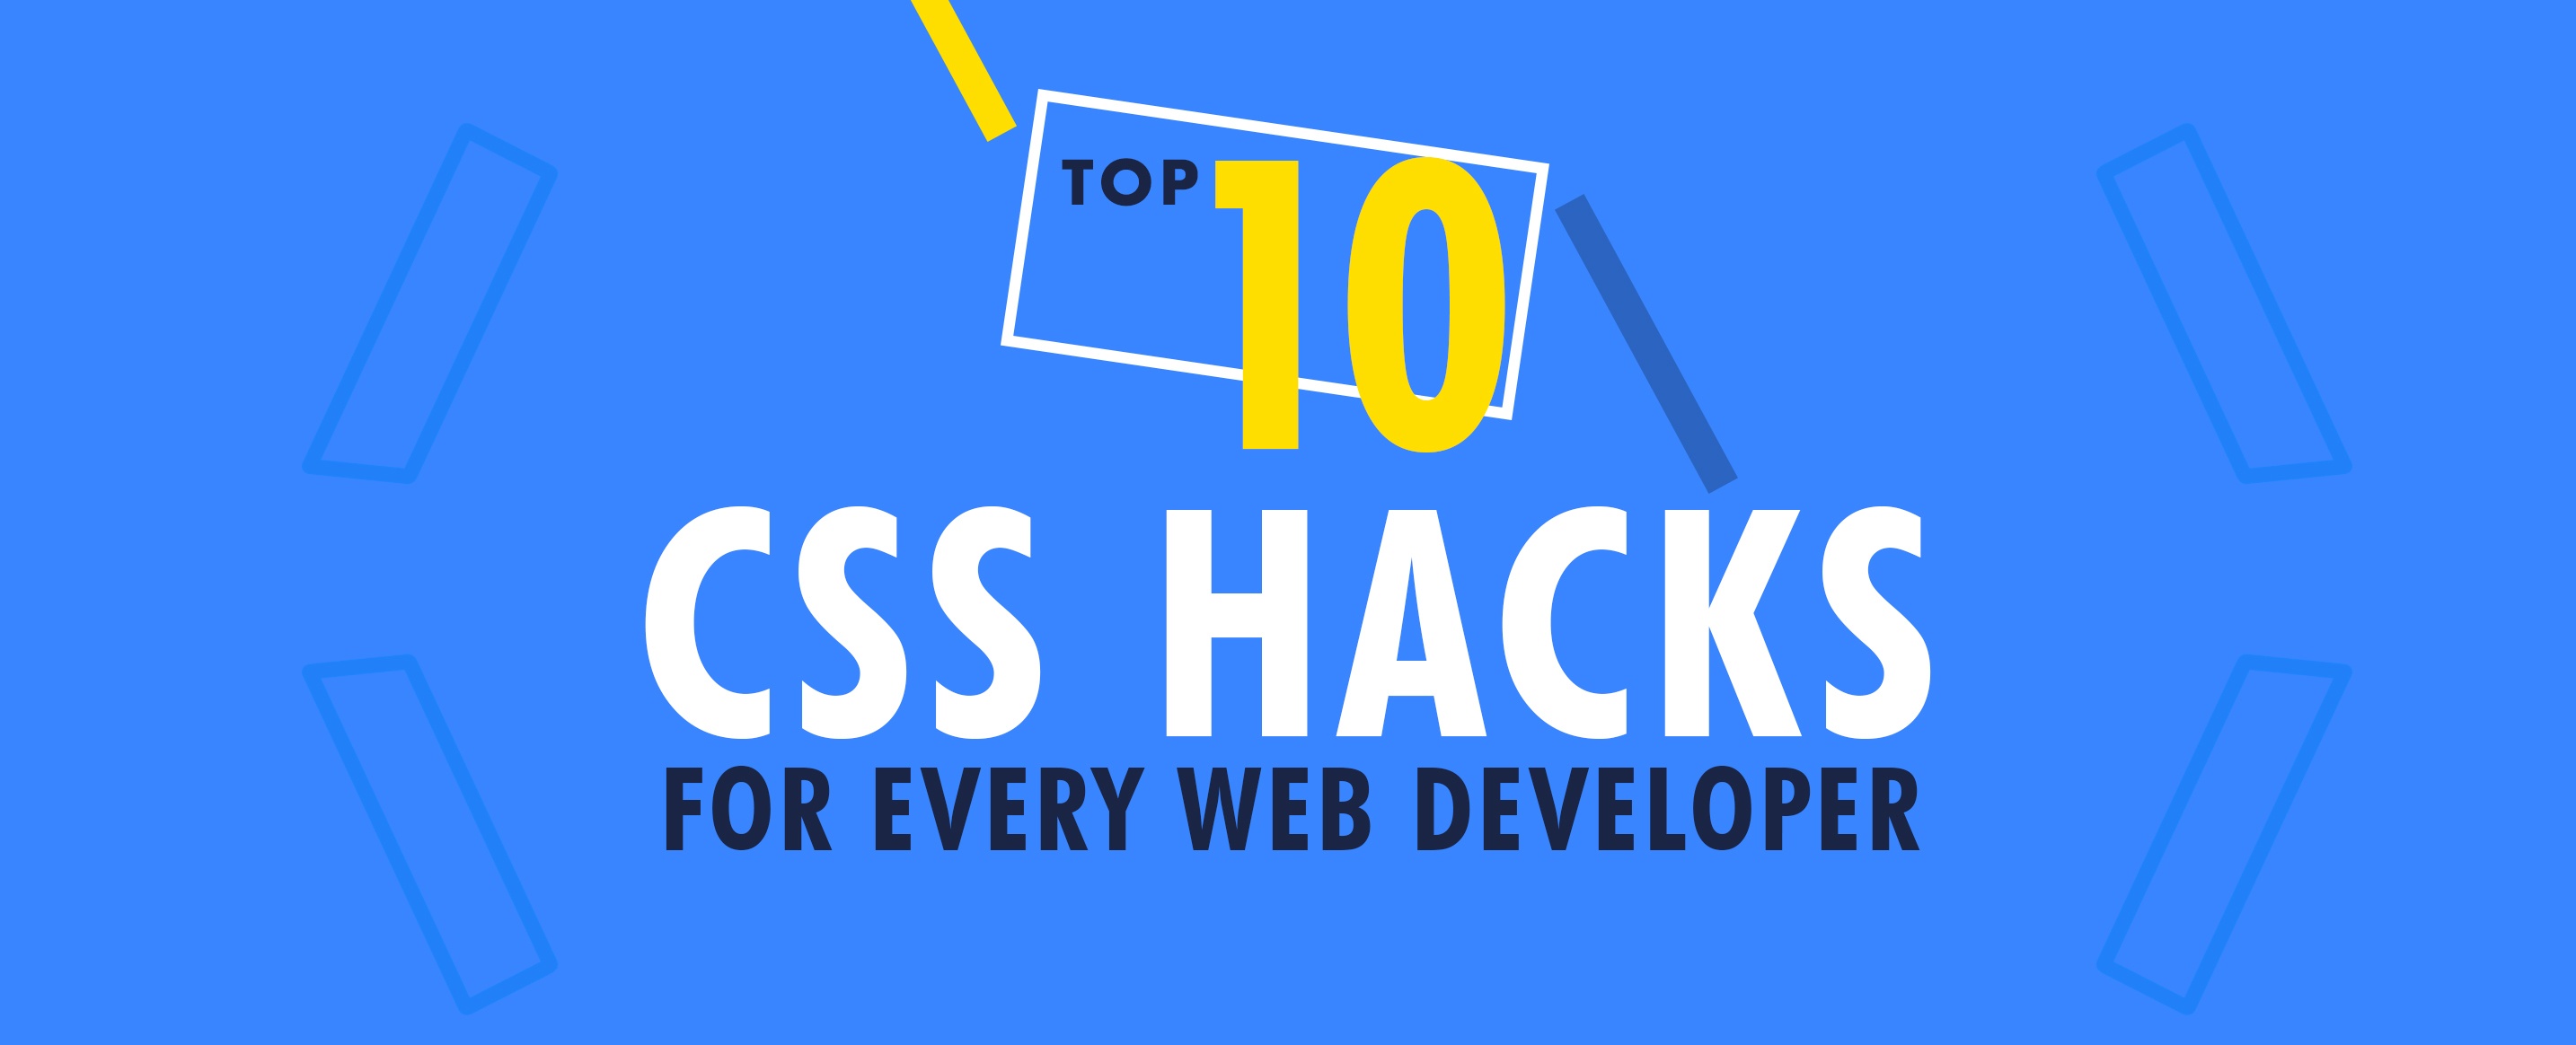 Top-10-CSS-Hacks-For-Every-Web-Developer